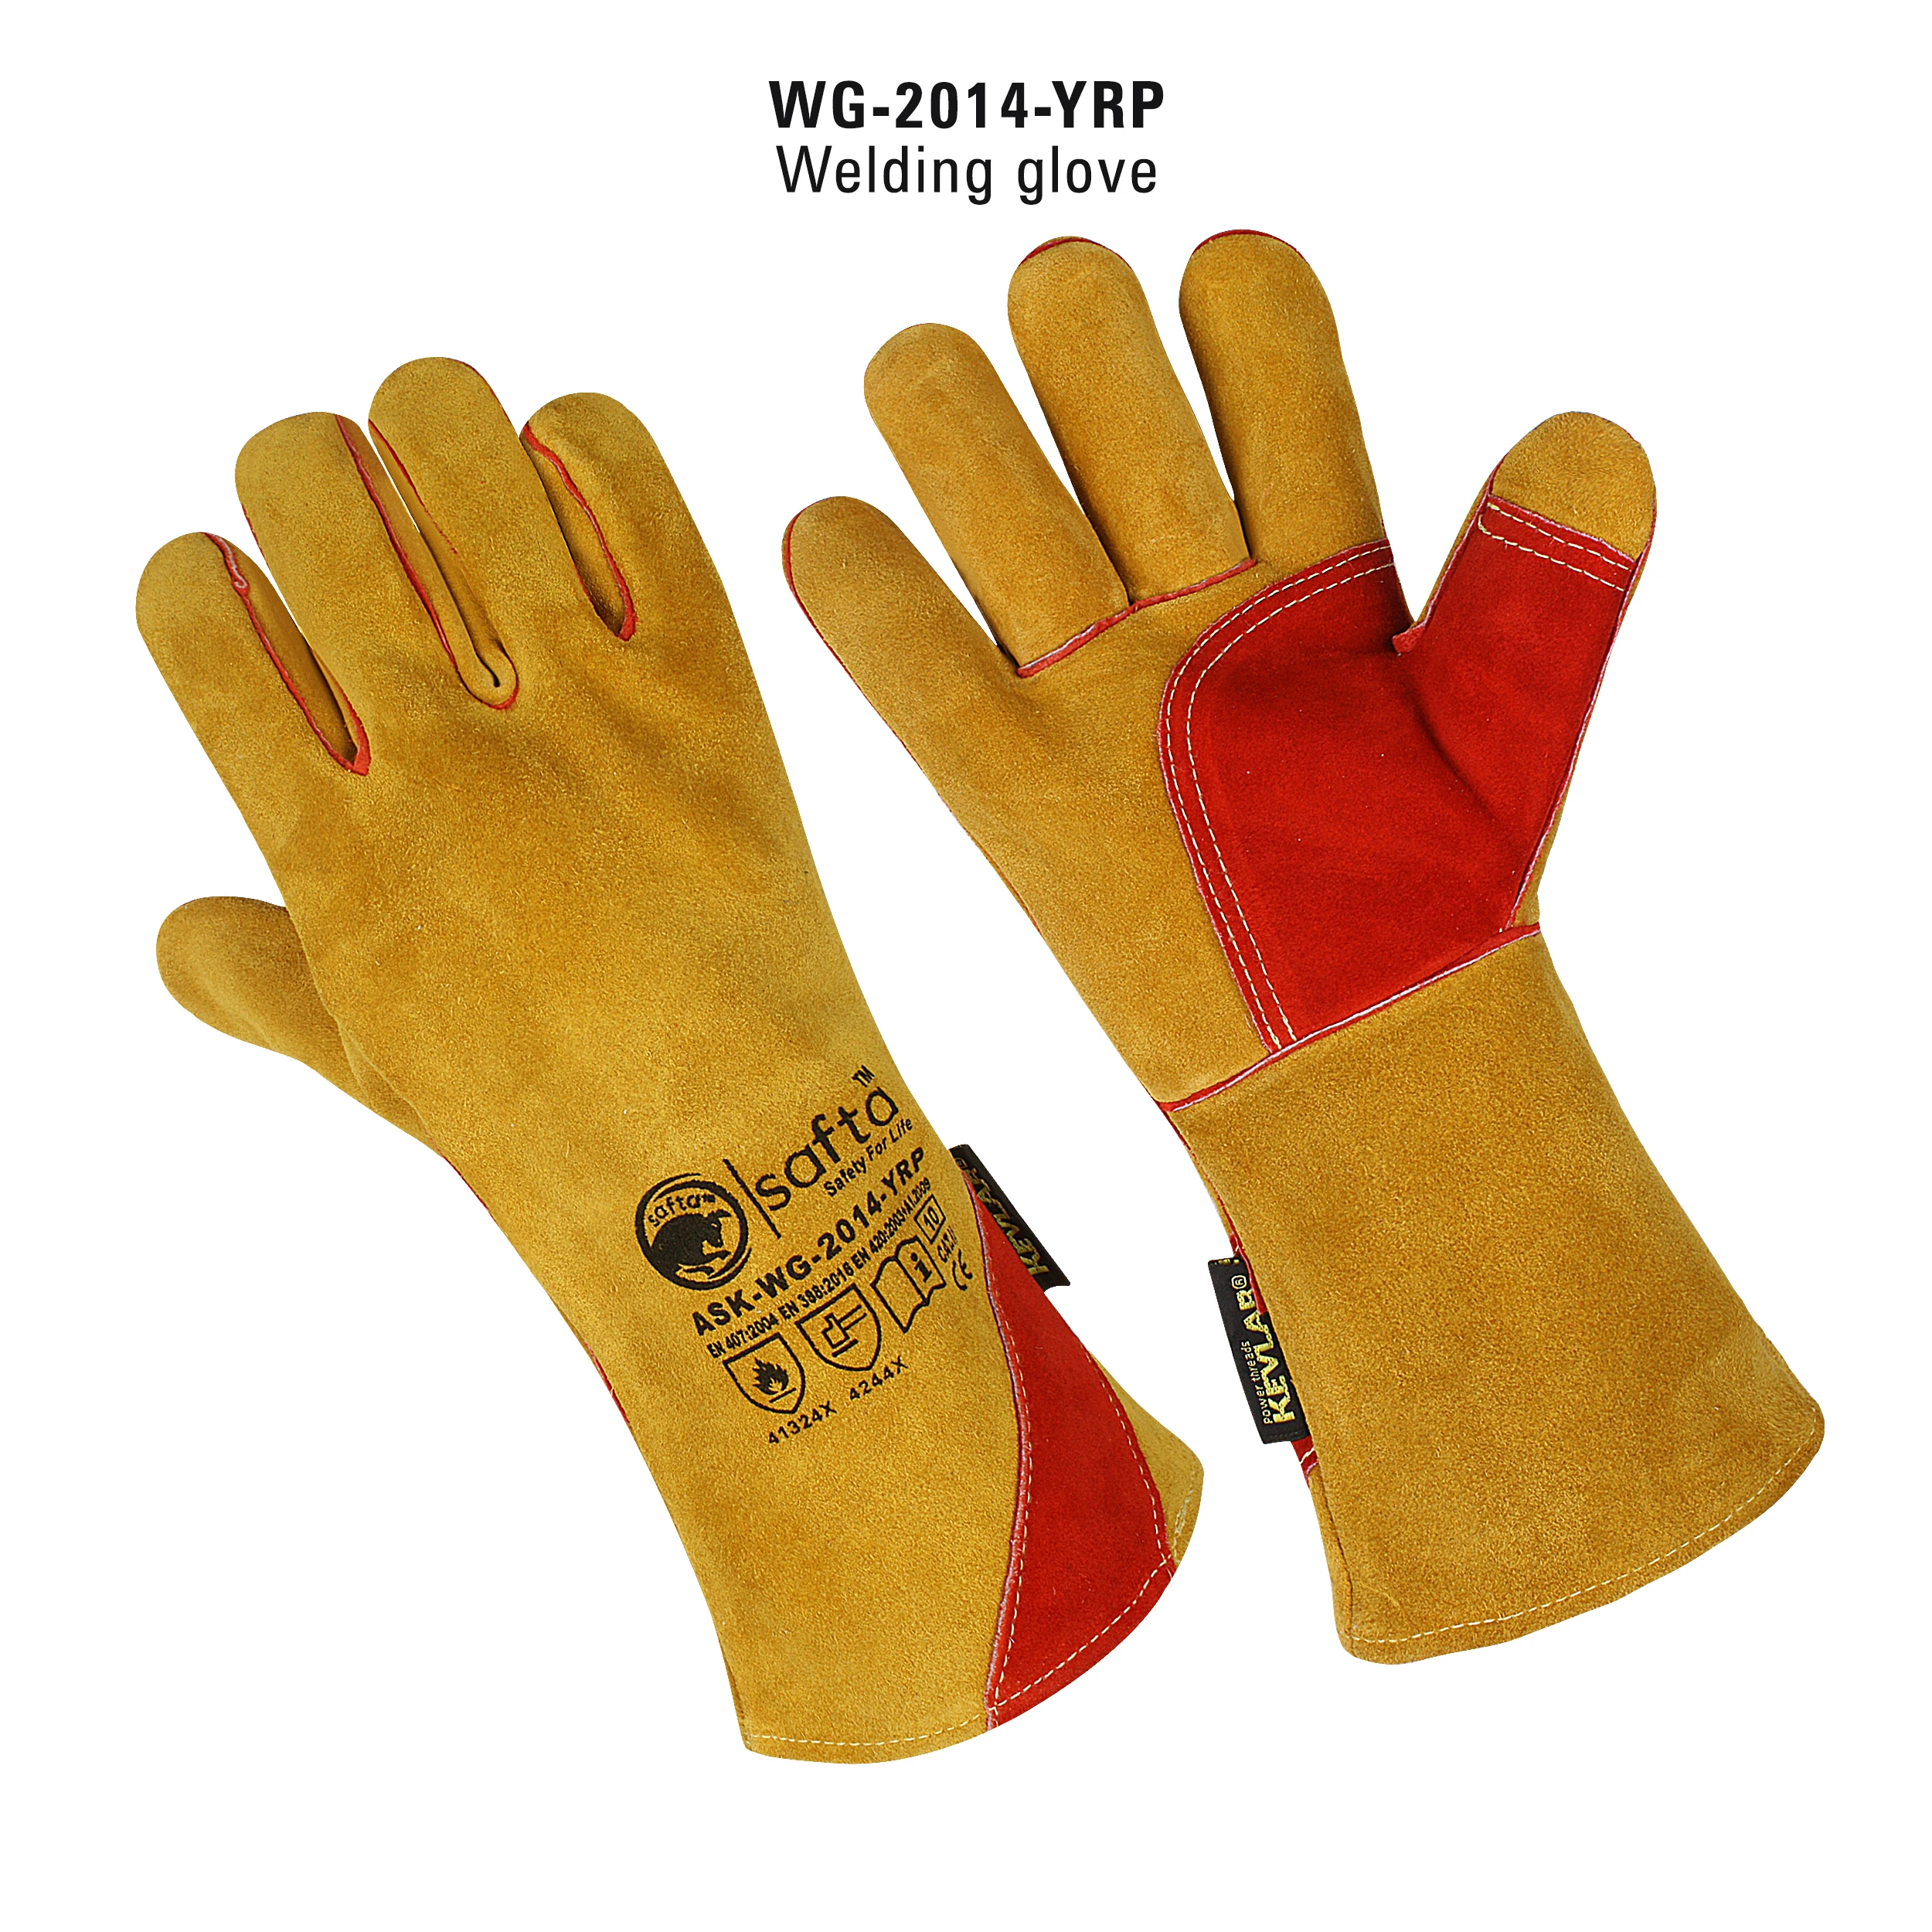 OgsK Conventional welding gloves/Extreme Heat and Fire Resistant Reinforced Versatile Gloves/protective gloves X-Large 